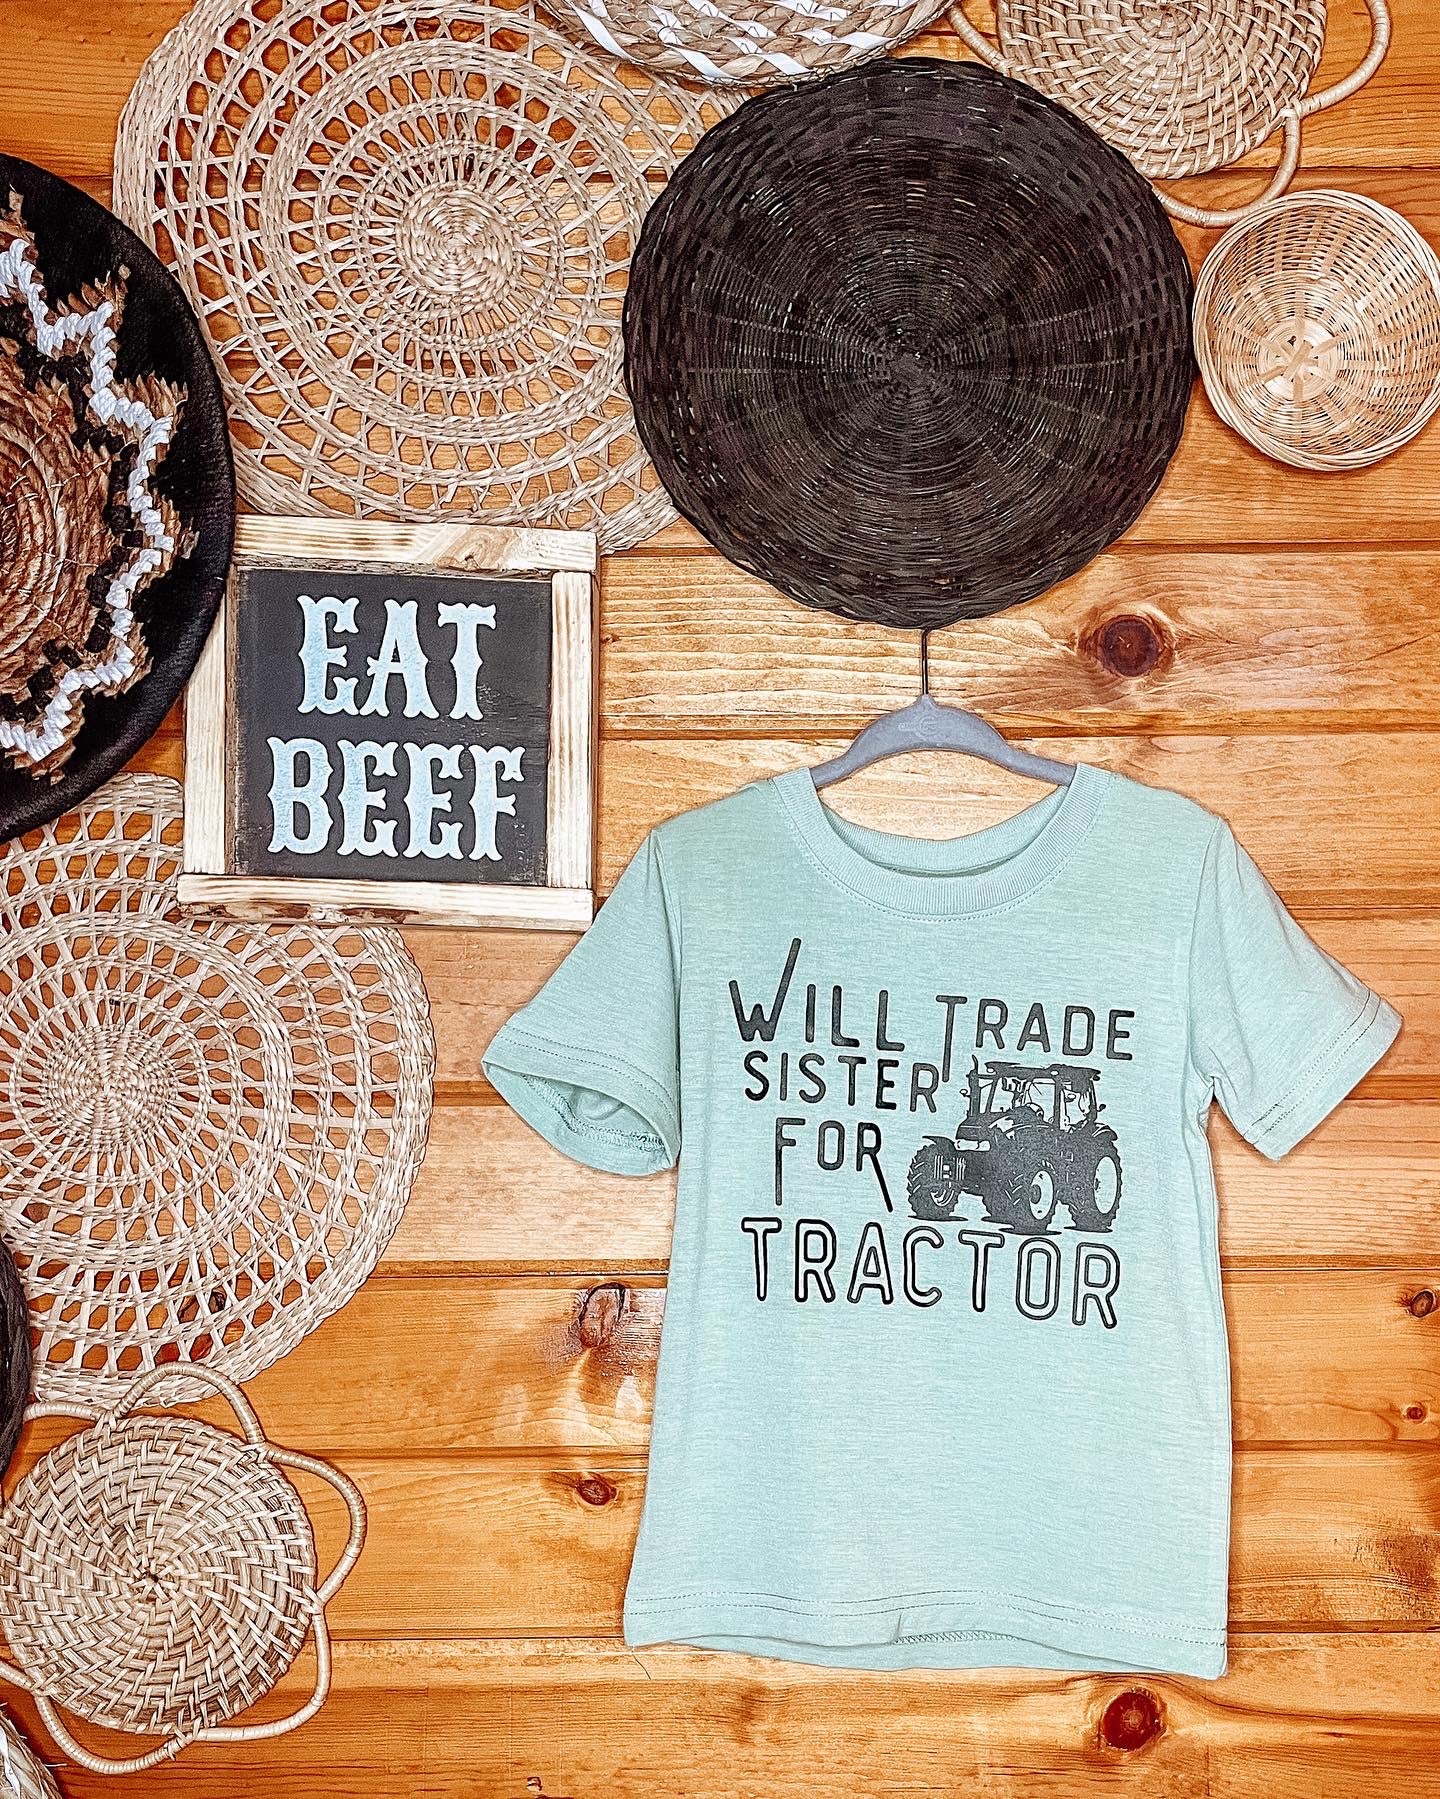 the Will Trade |Sister| for Tractor boys tee